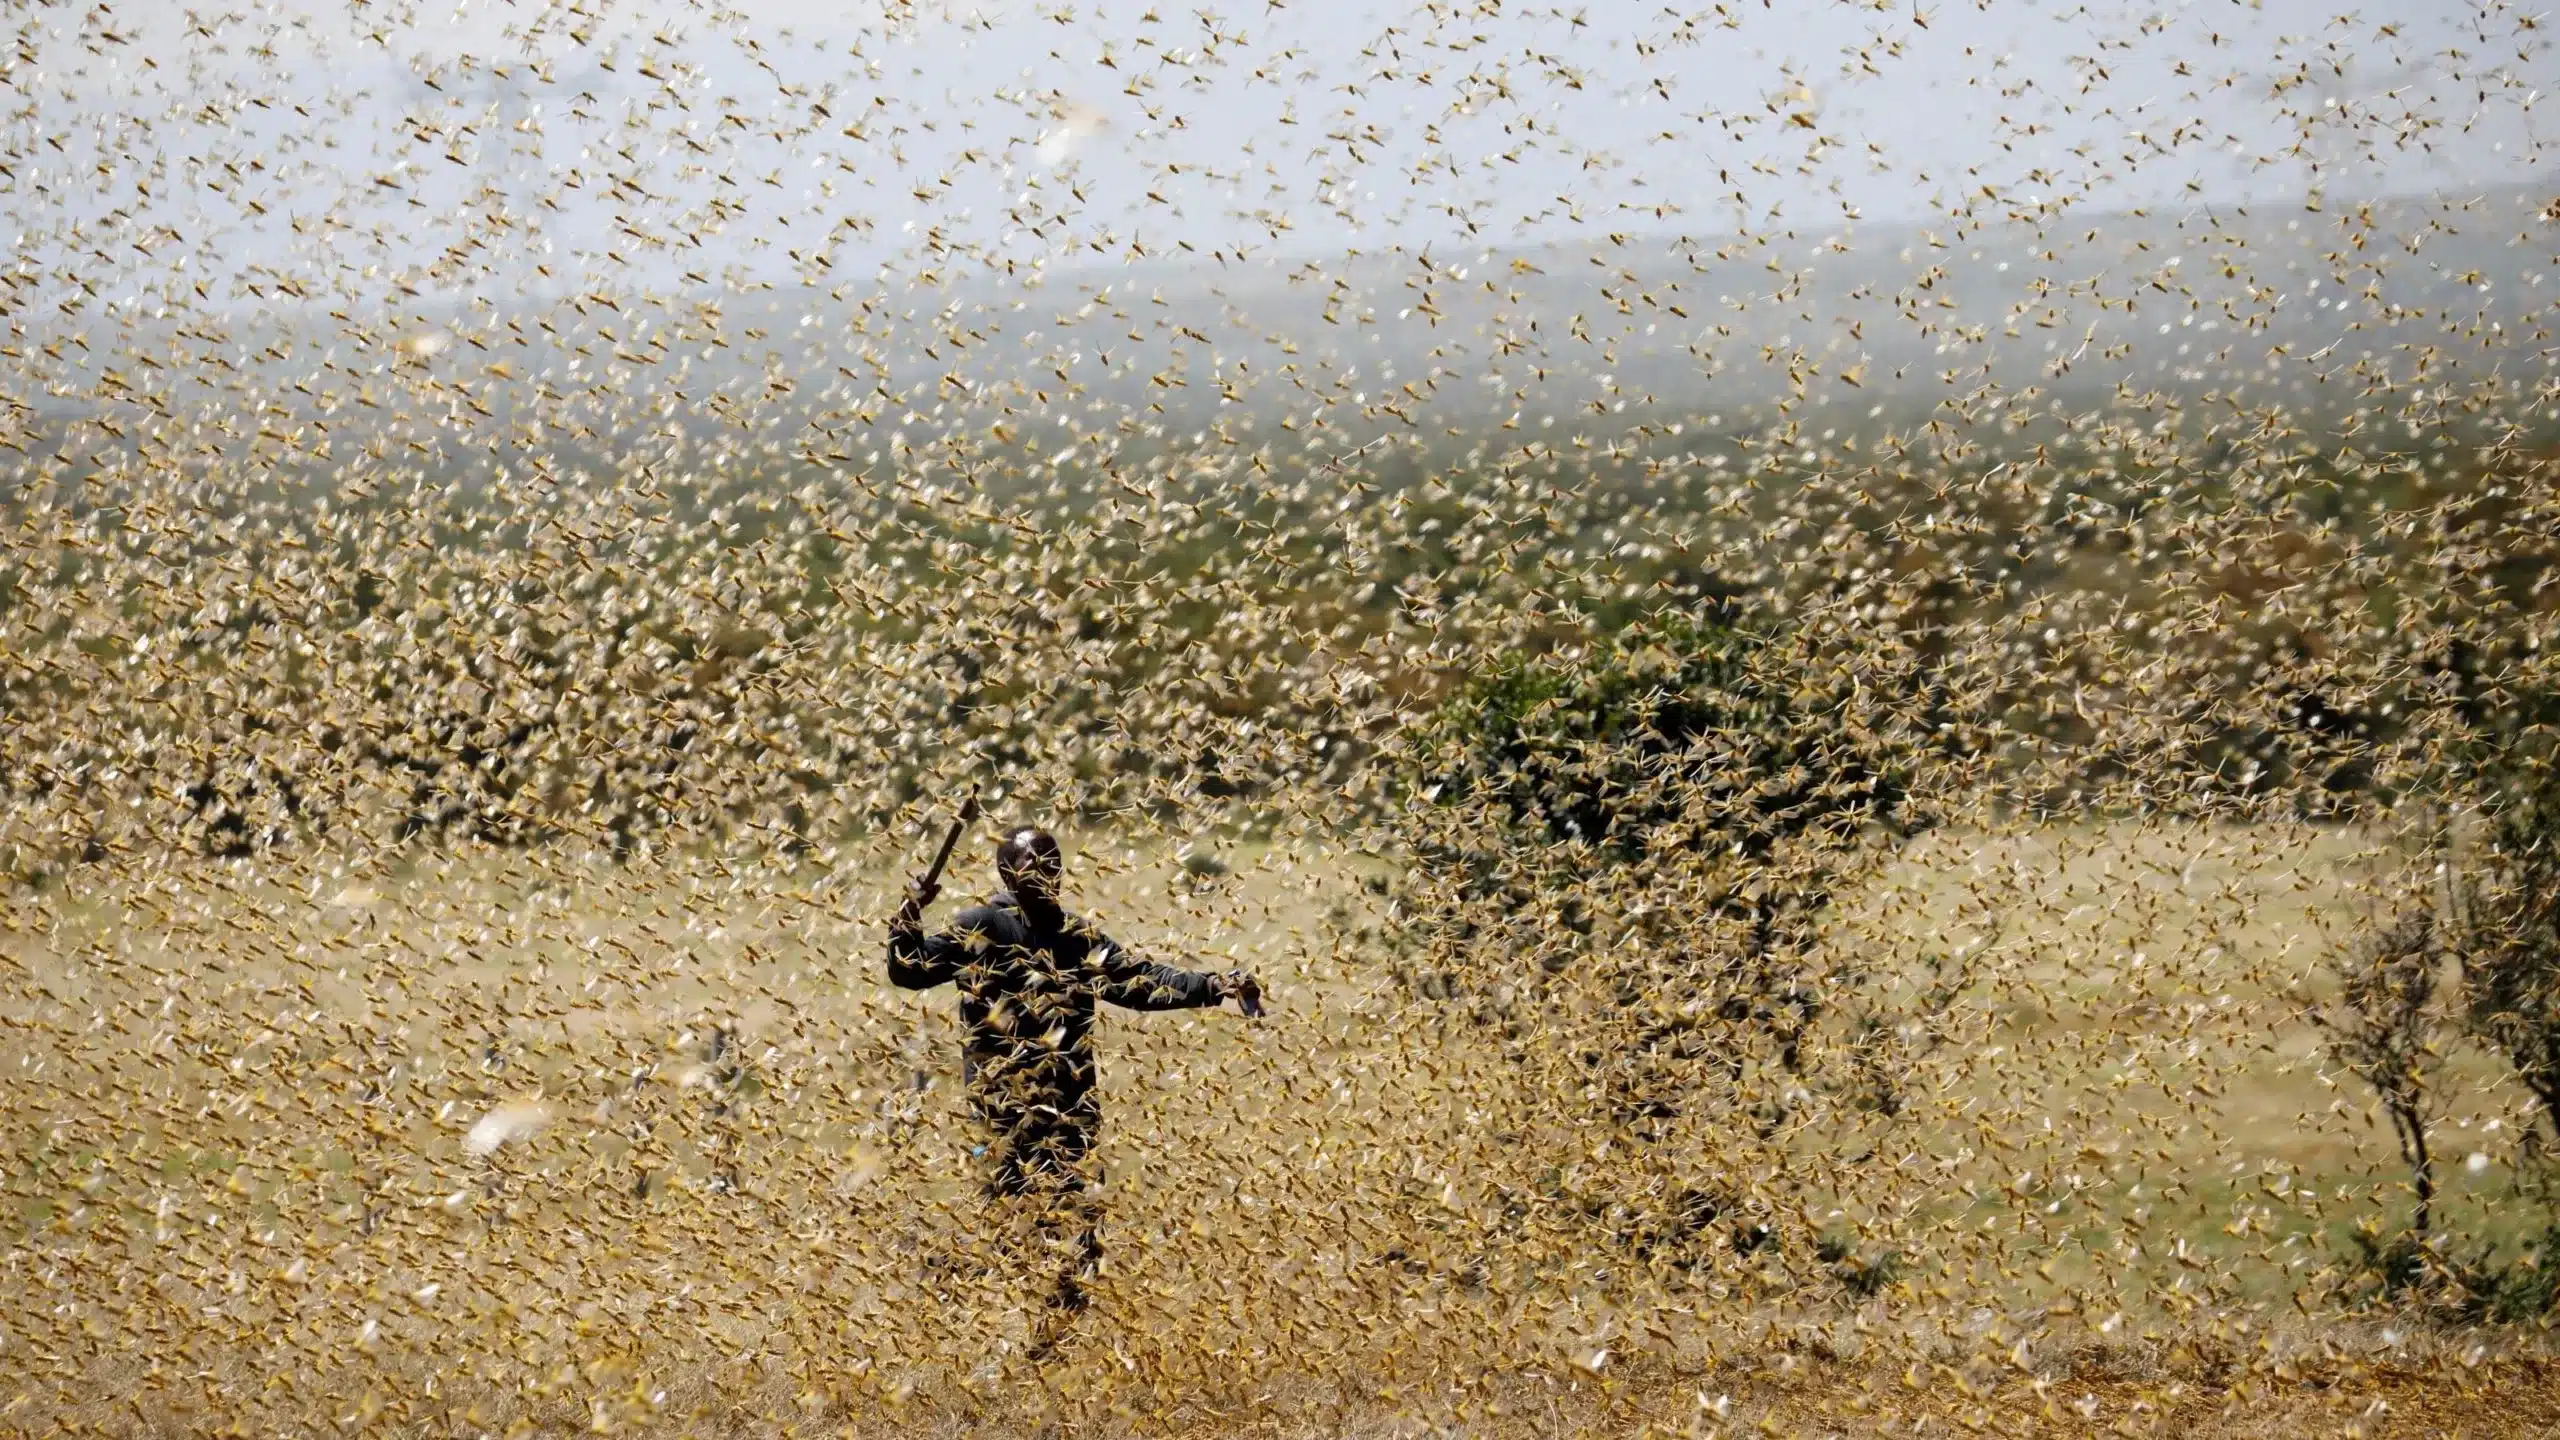 Explained: What is the locust plague and impact on India